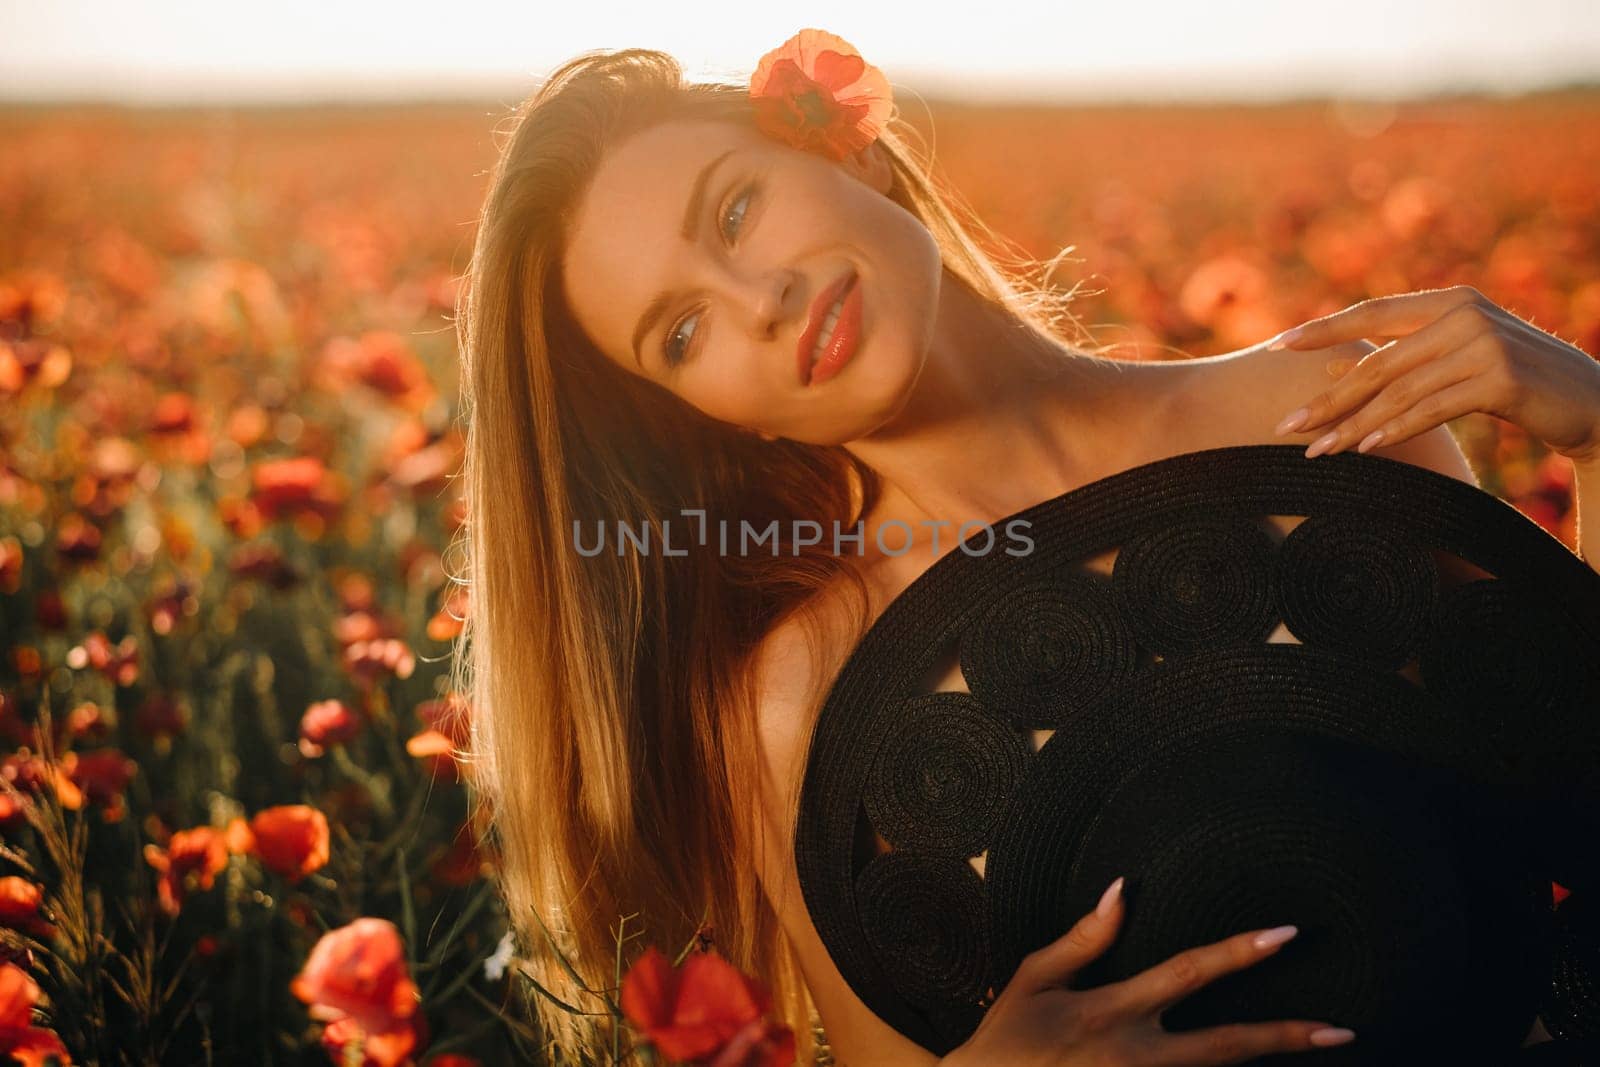 naked girl with a black hat in her hands in a poppy field at sunset.